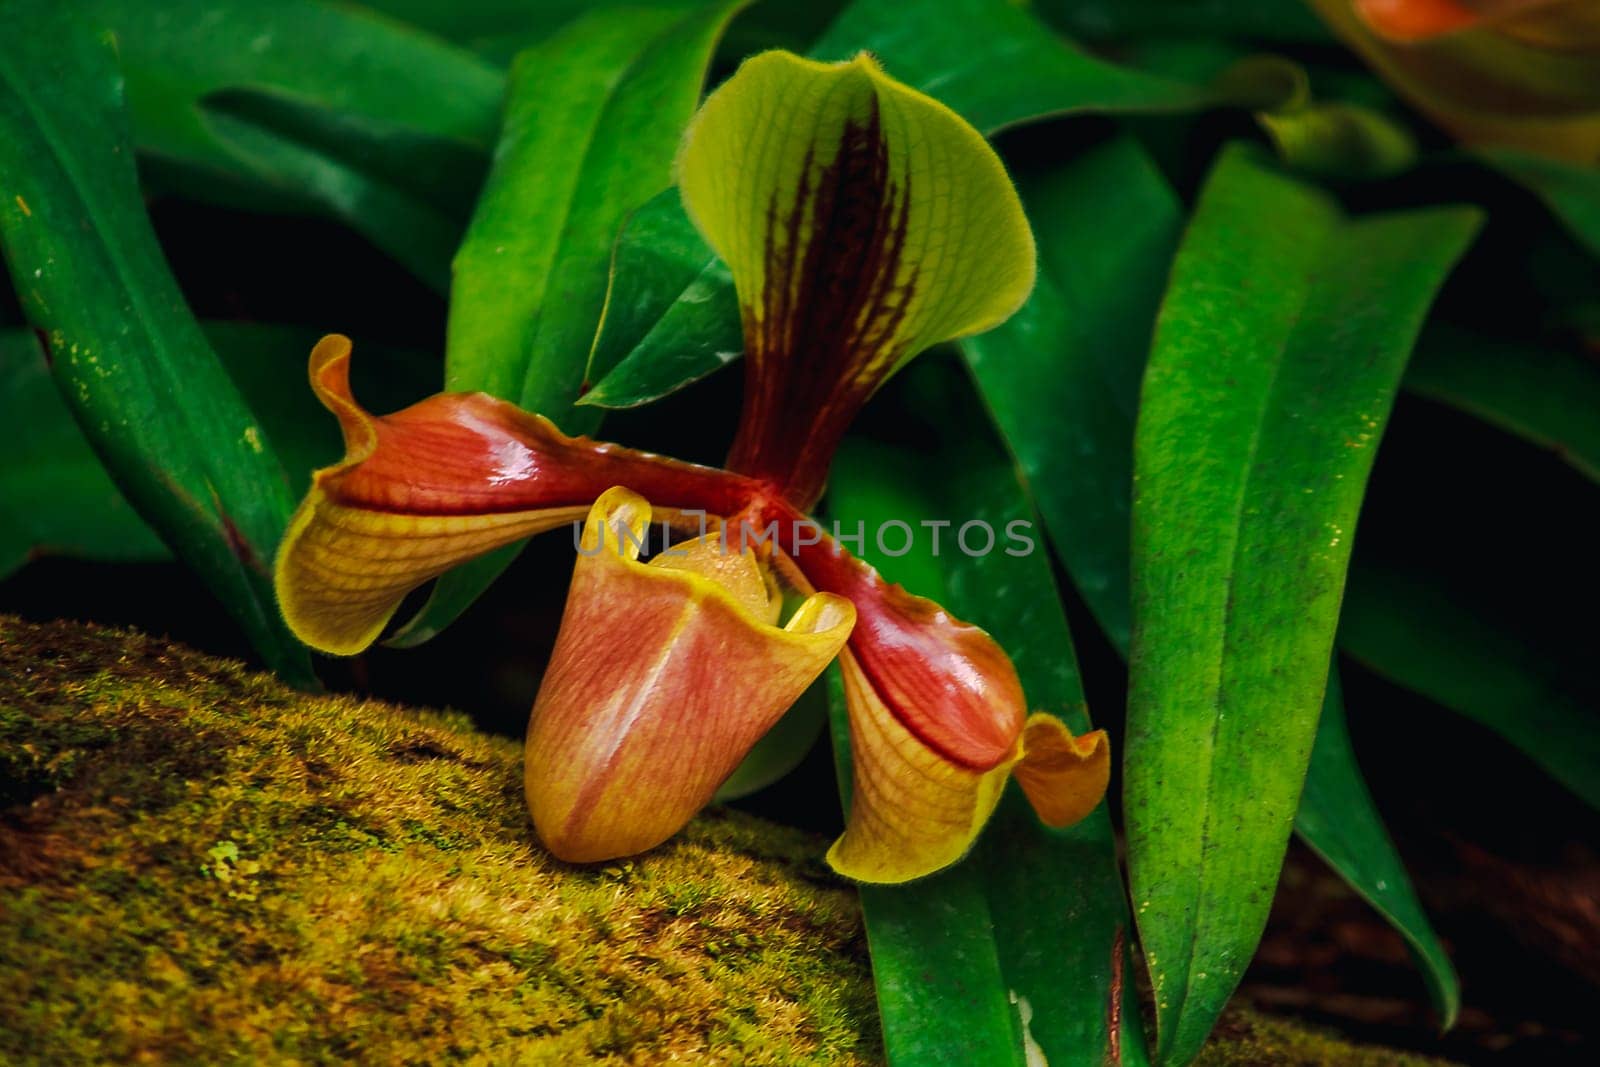 Paphiopedilum Common in Southeast Asia by Puripatt